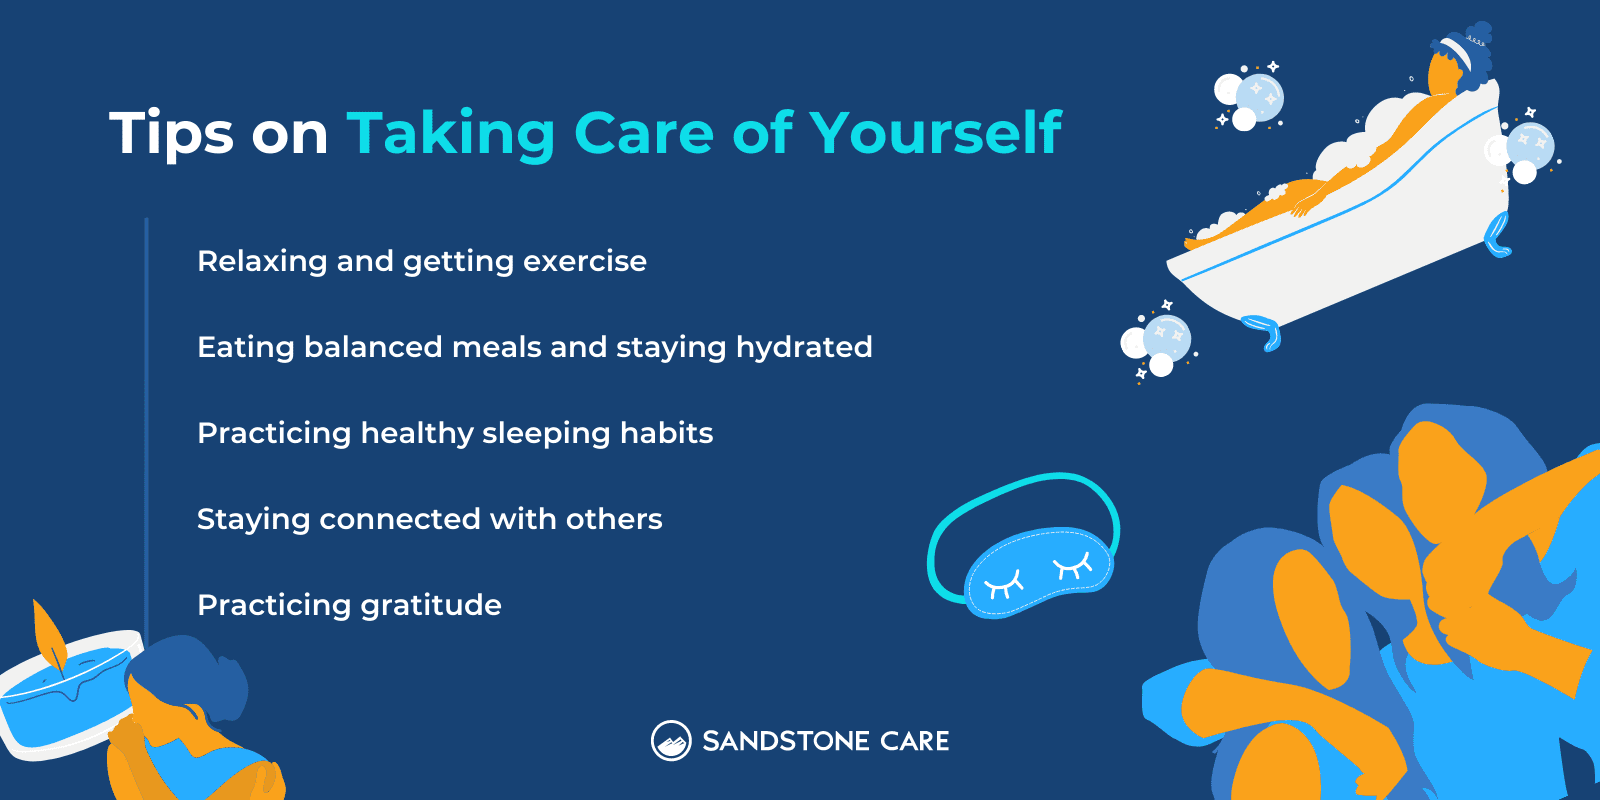 "Tips on taking care of yourself" written on top of the list of ways with relevant graphics